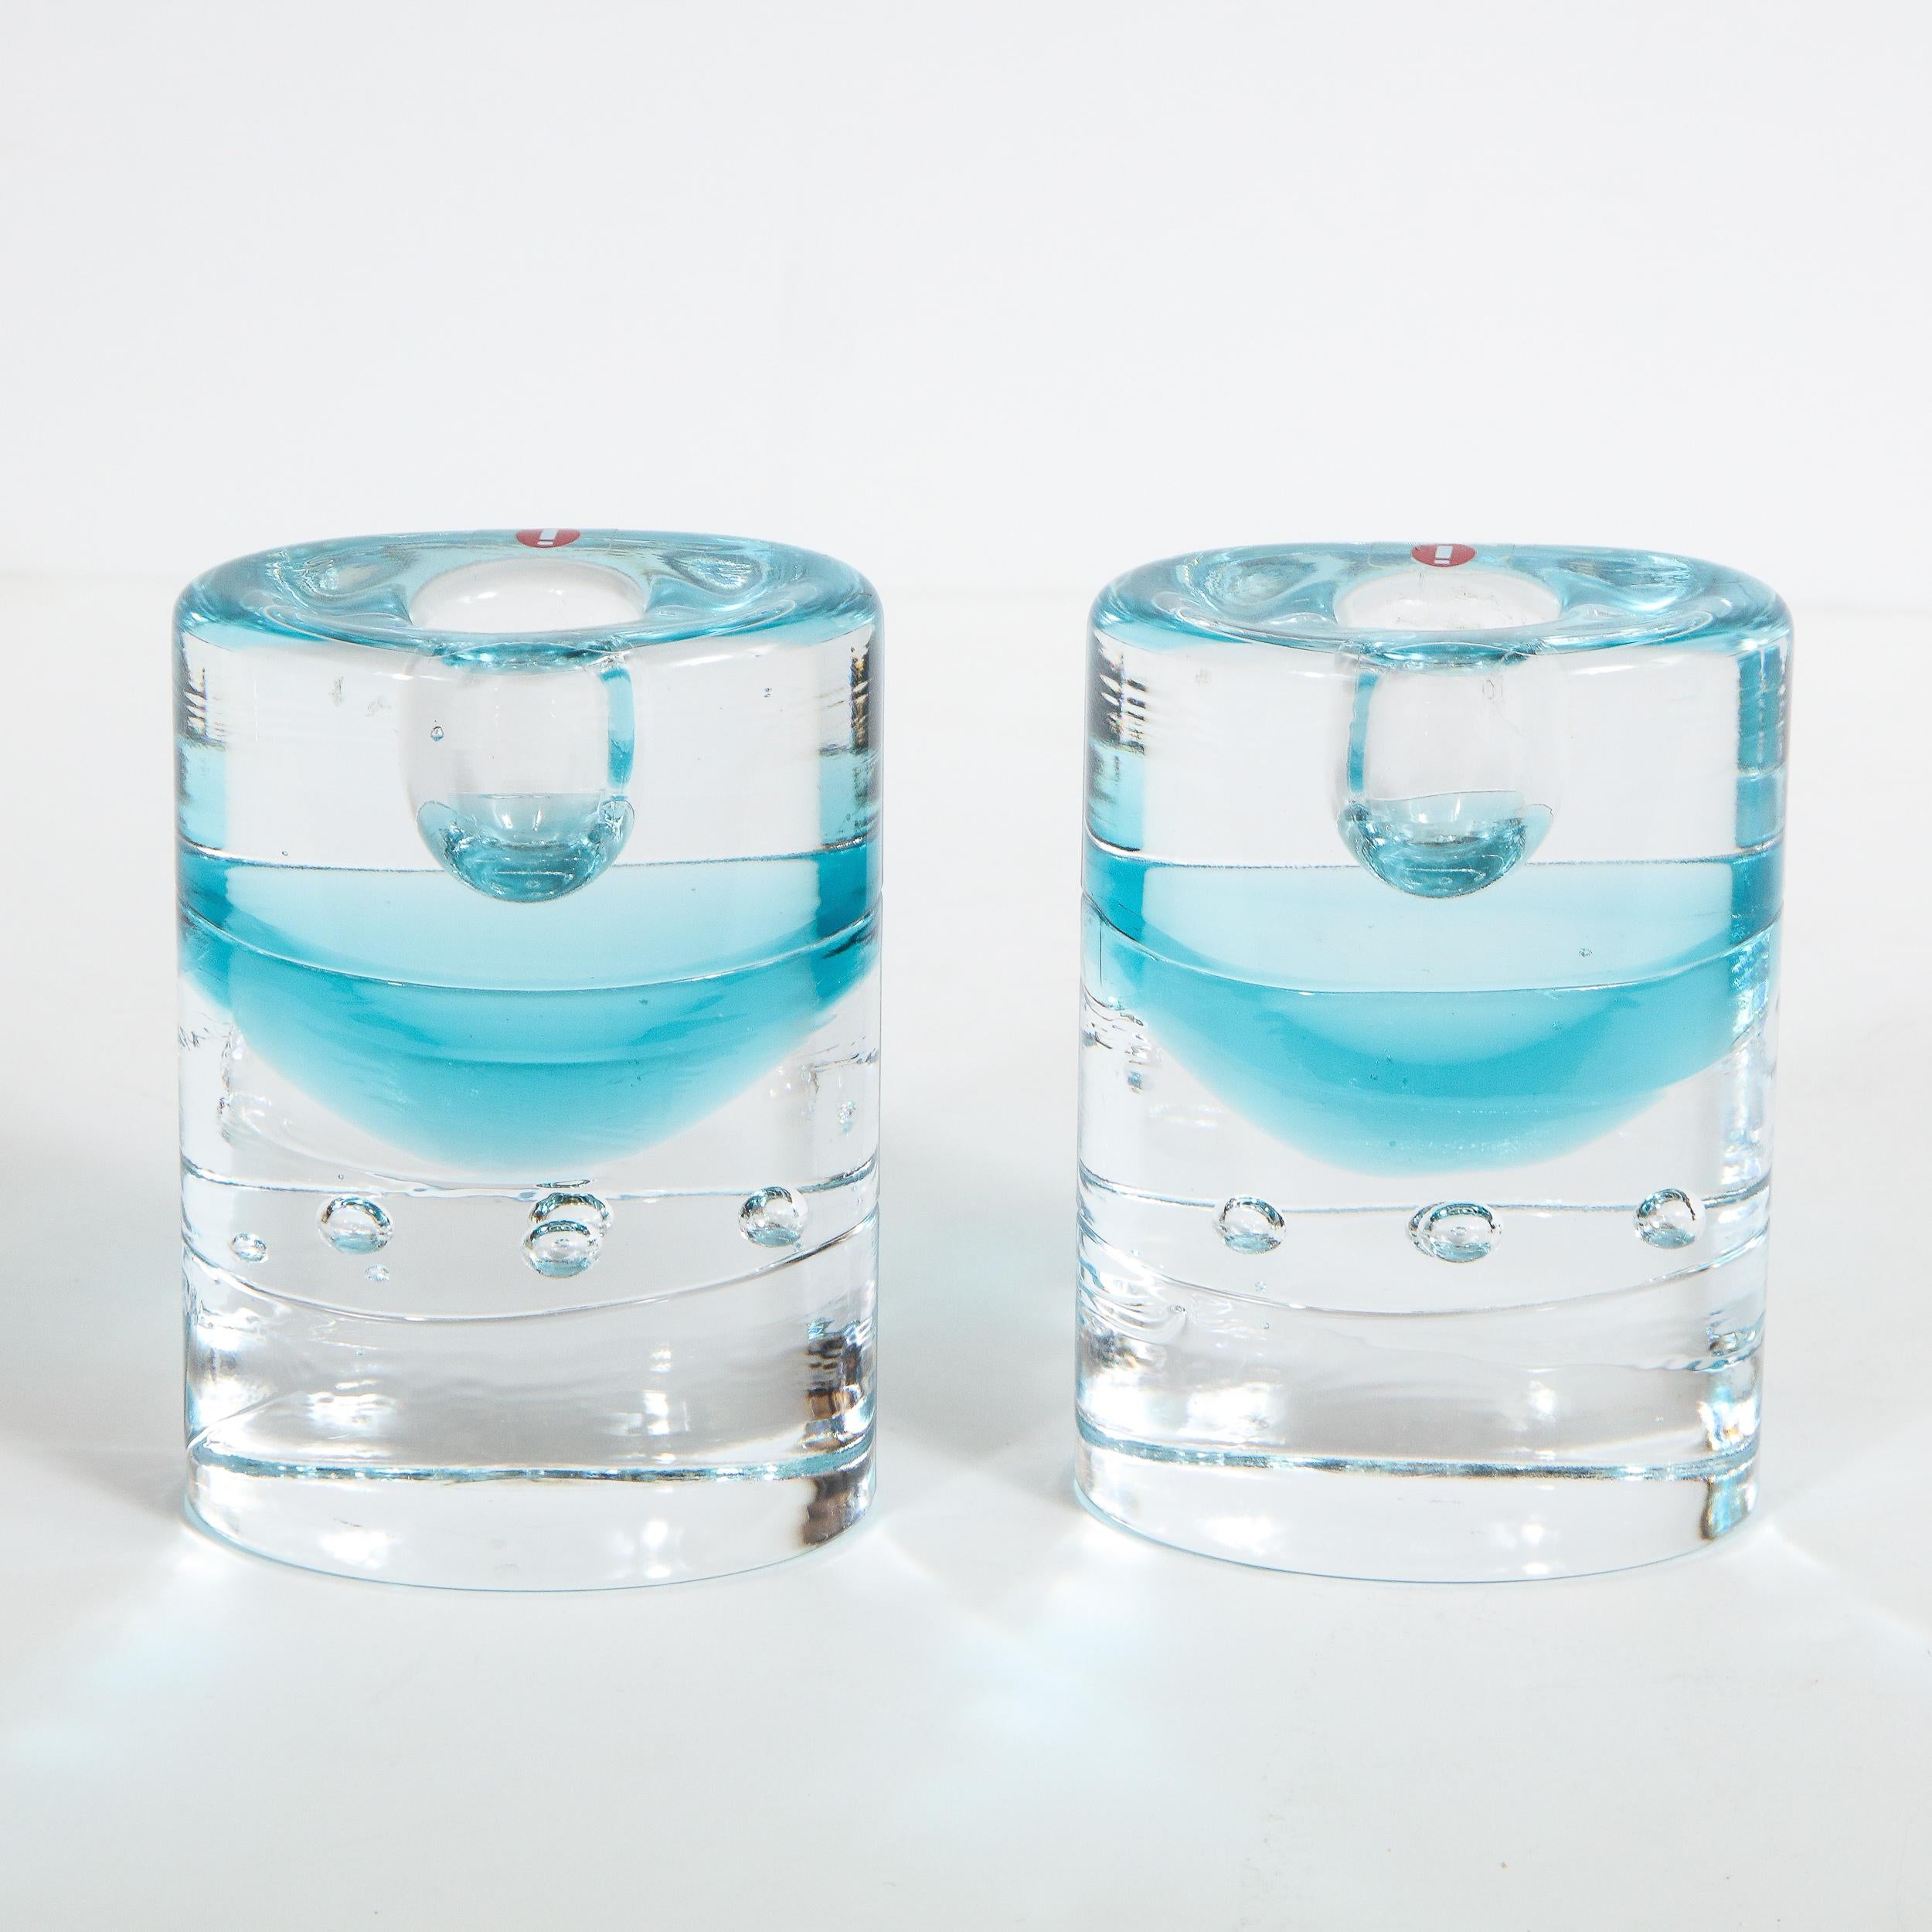 20th Century Pair of Modernist Candlesticks in Translucent and Acquamarine Glass by Littala For Sale